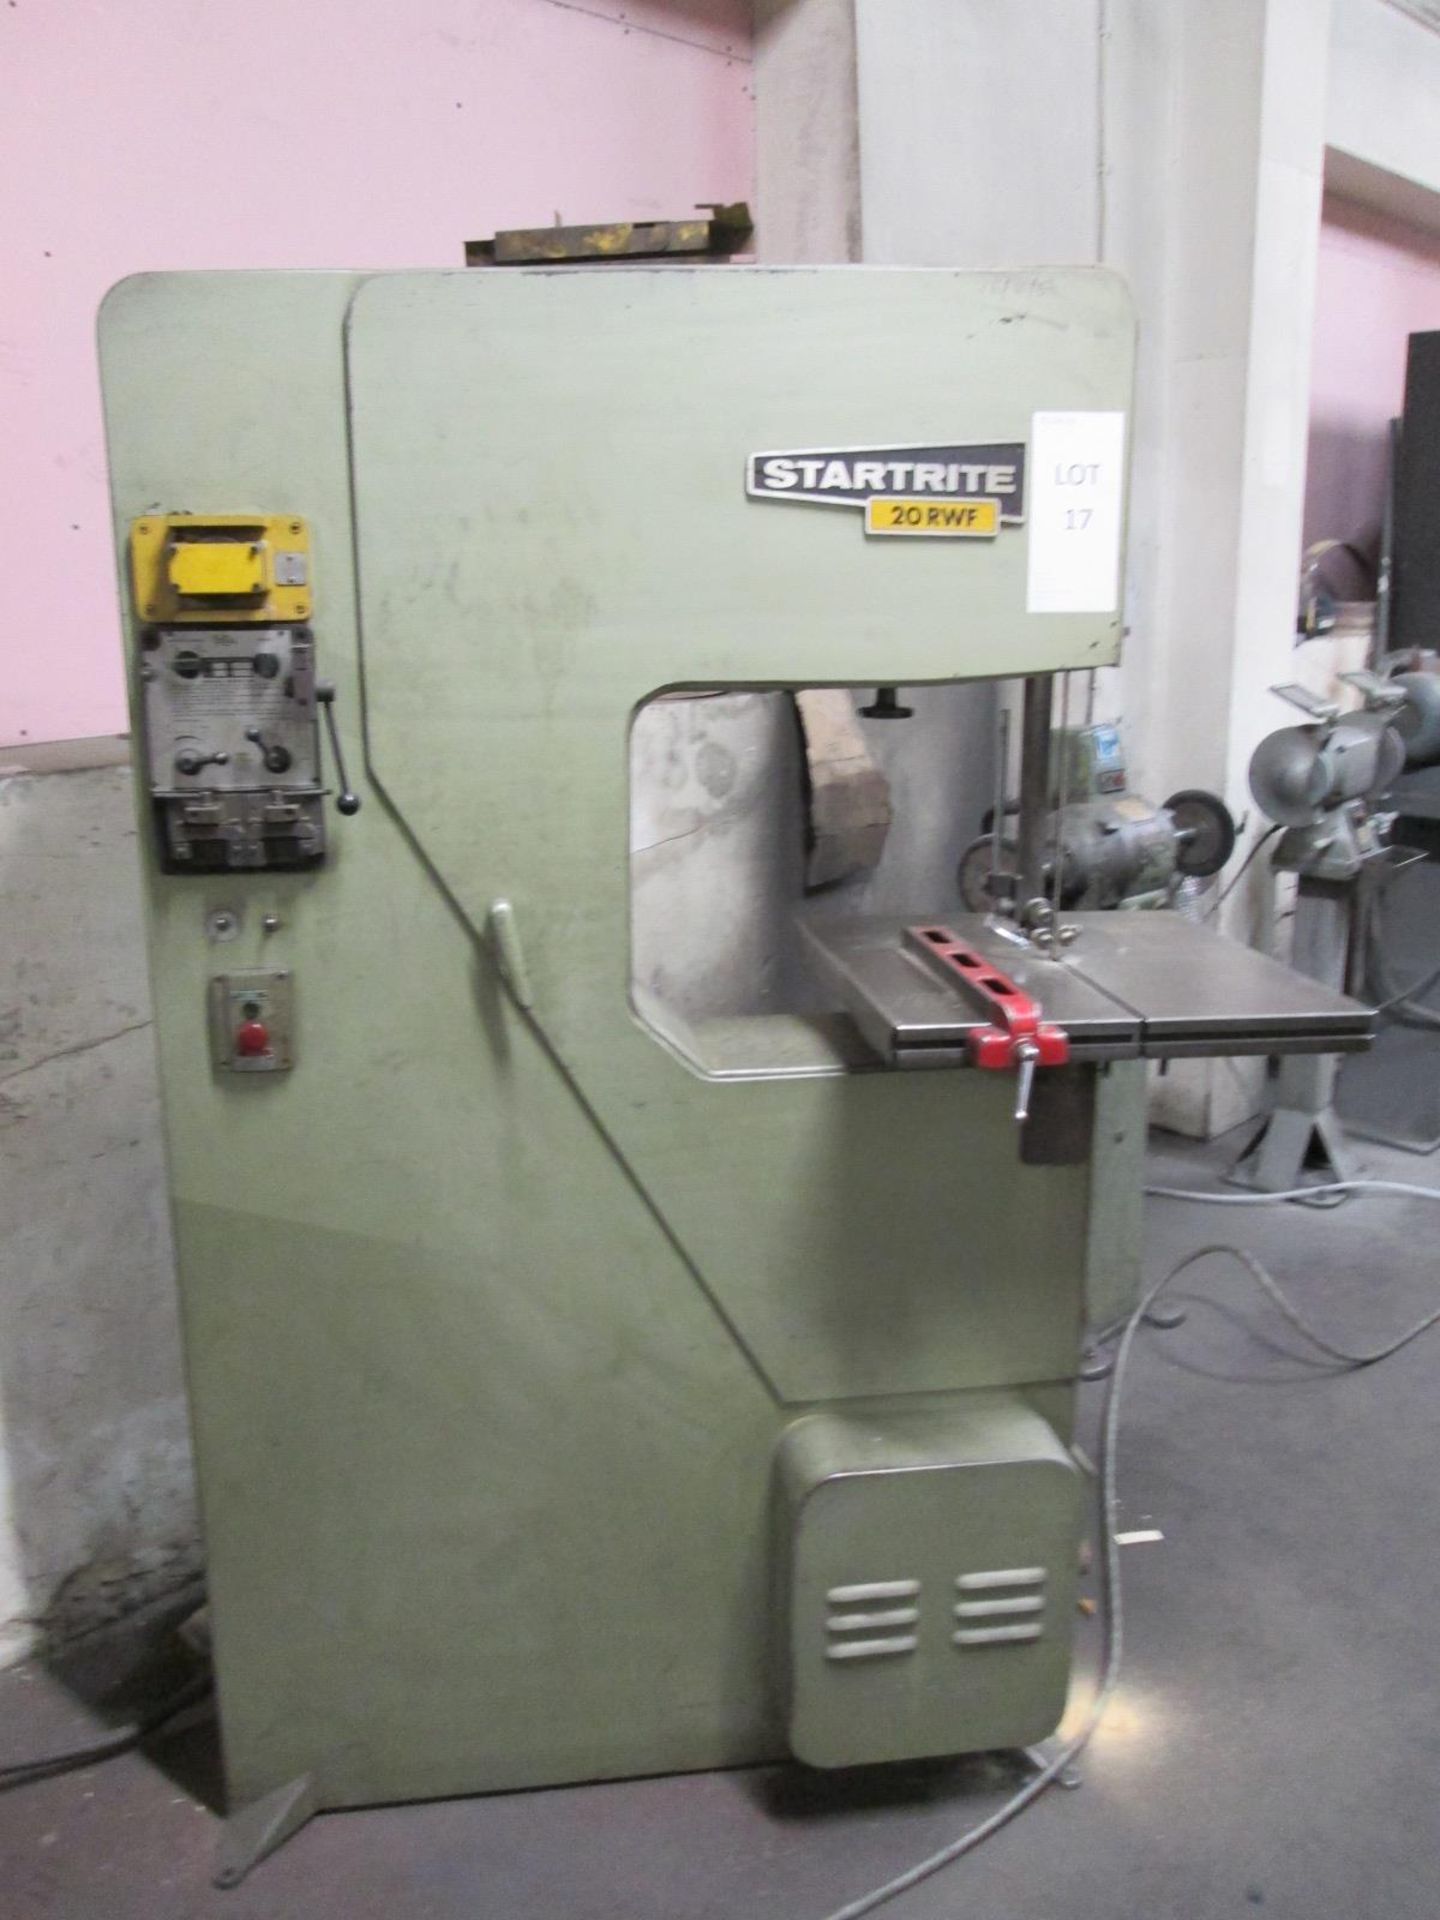 Startrite 20 RWF Vertical Bandsaw, Table size 530 mm x 530 mm, Throat 505 mm, Blade welding